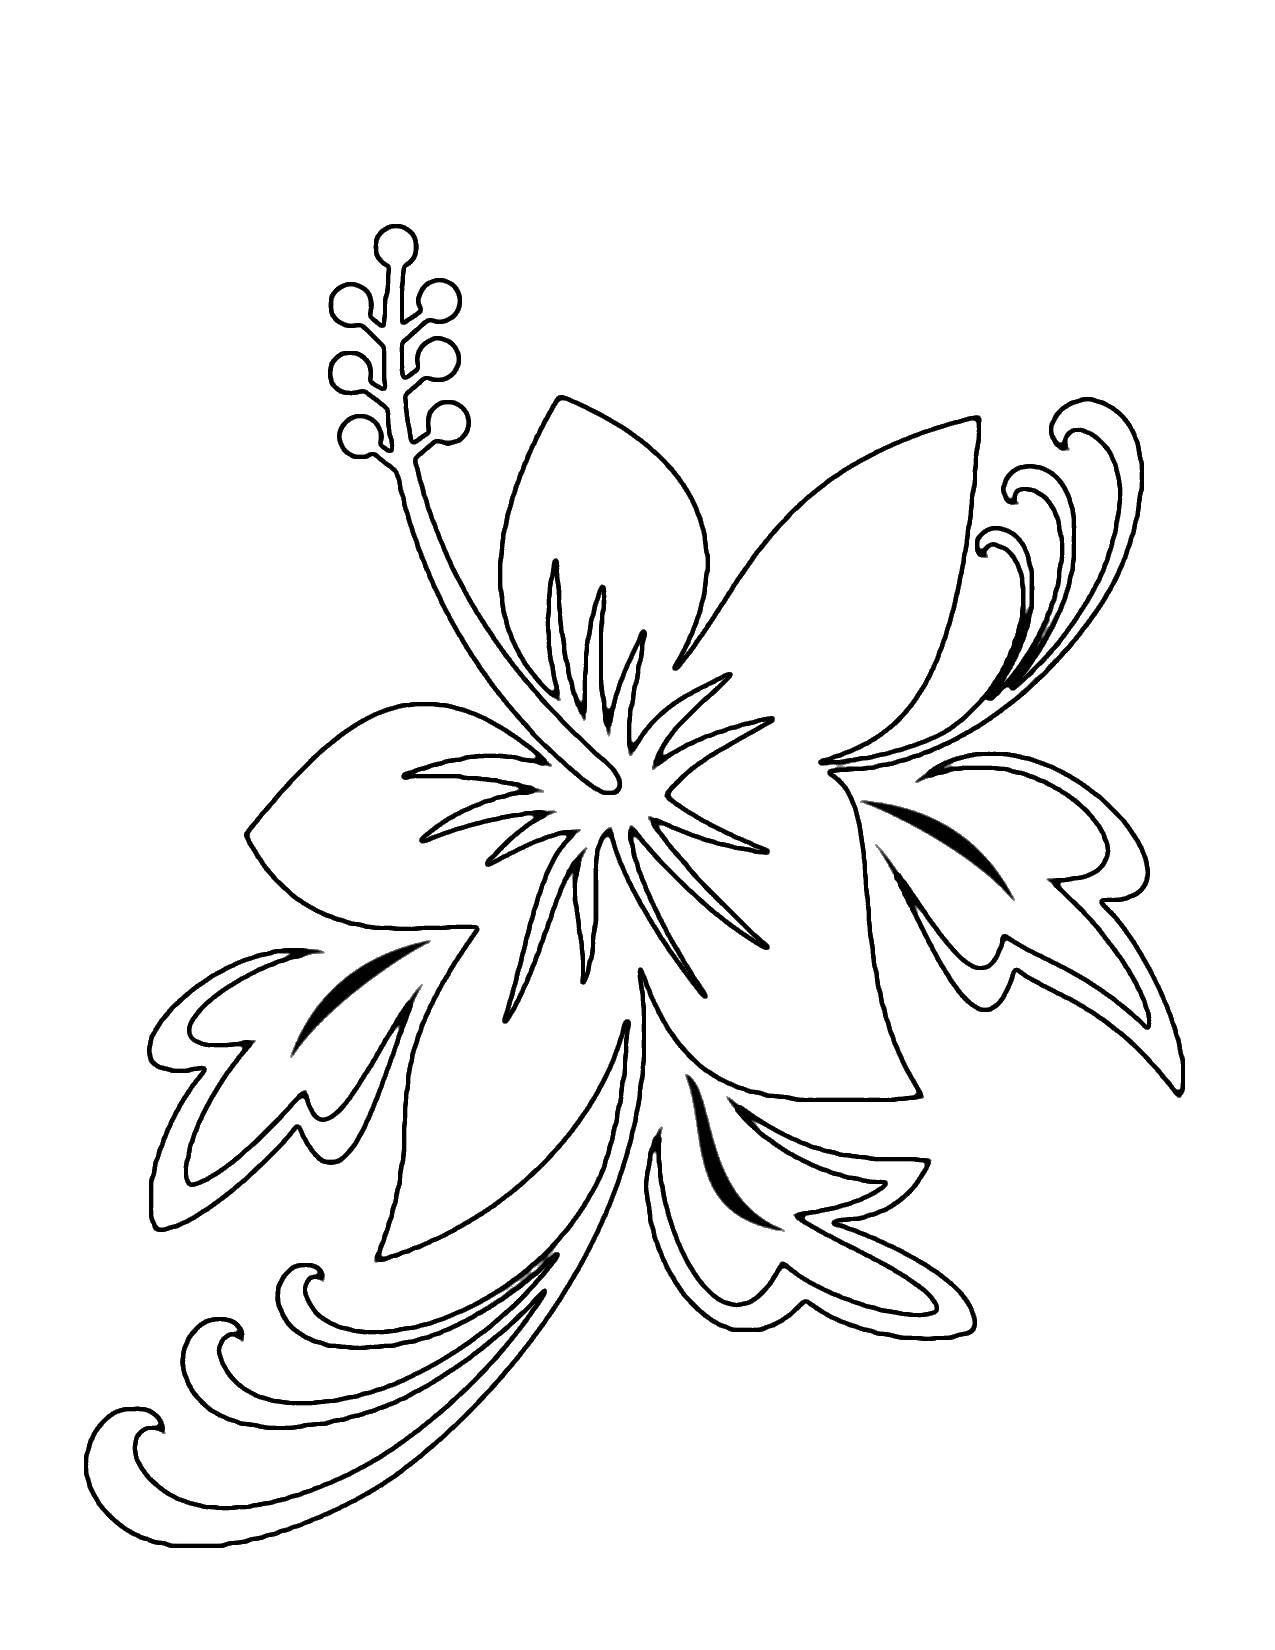 Coloring Lily. Category flowers. Tags:  flowers, Lily, pollen.